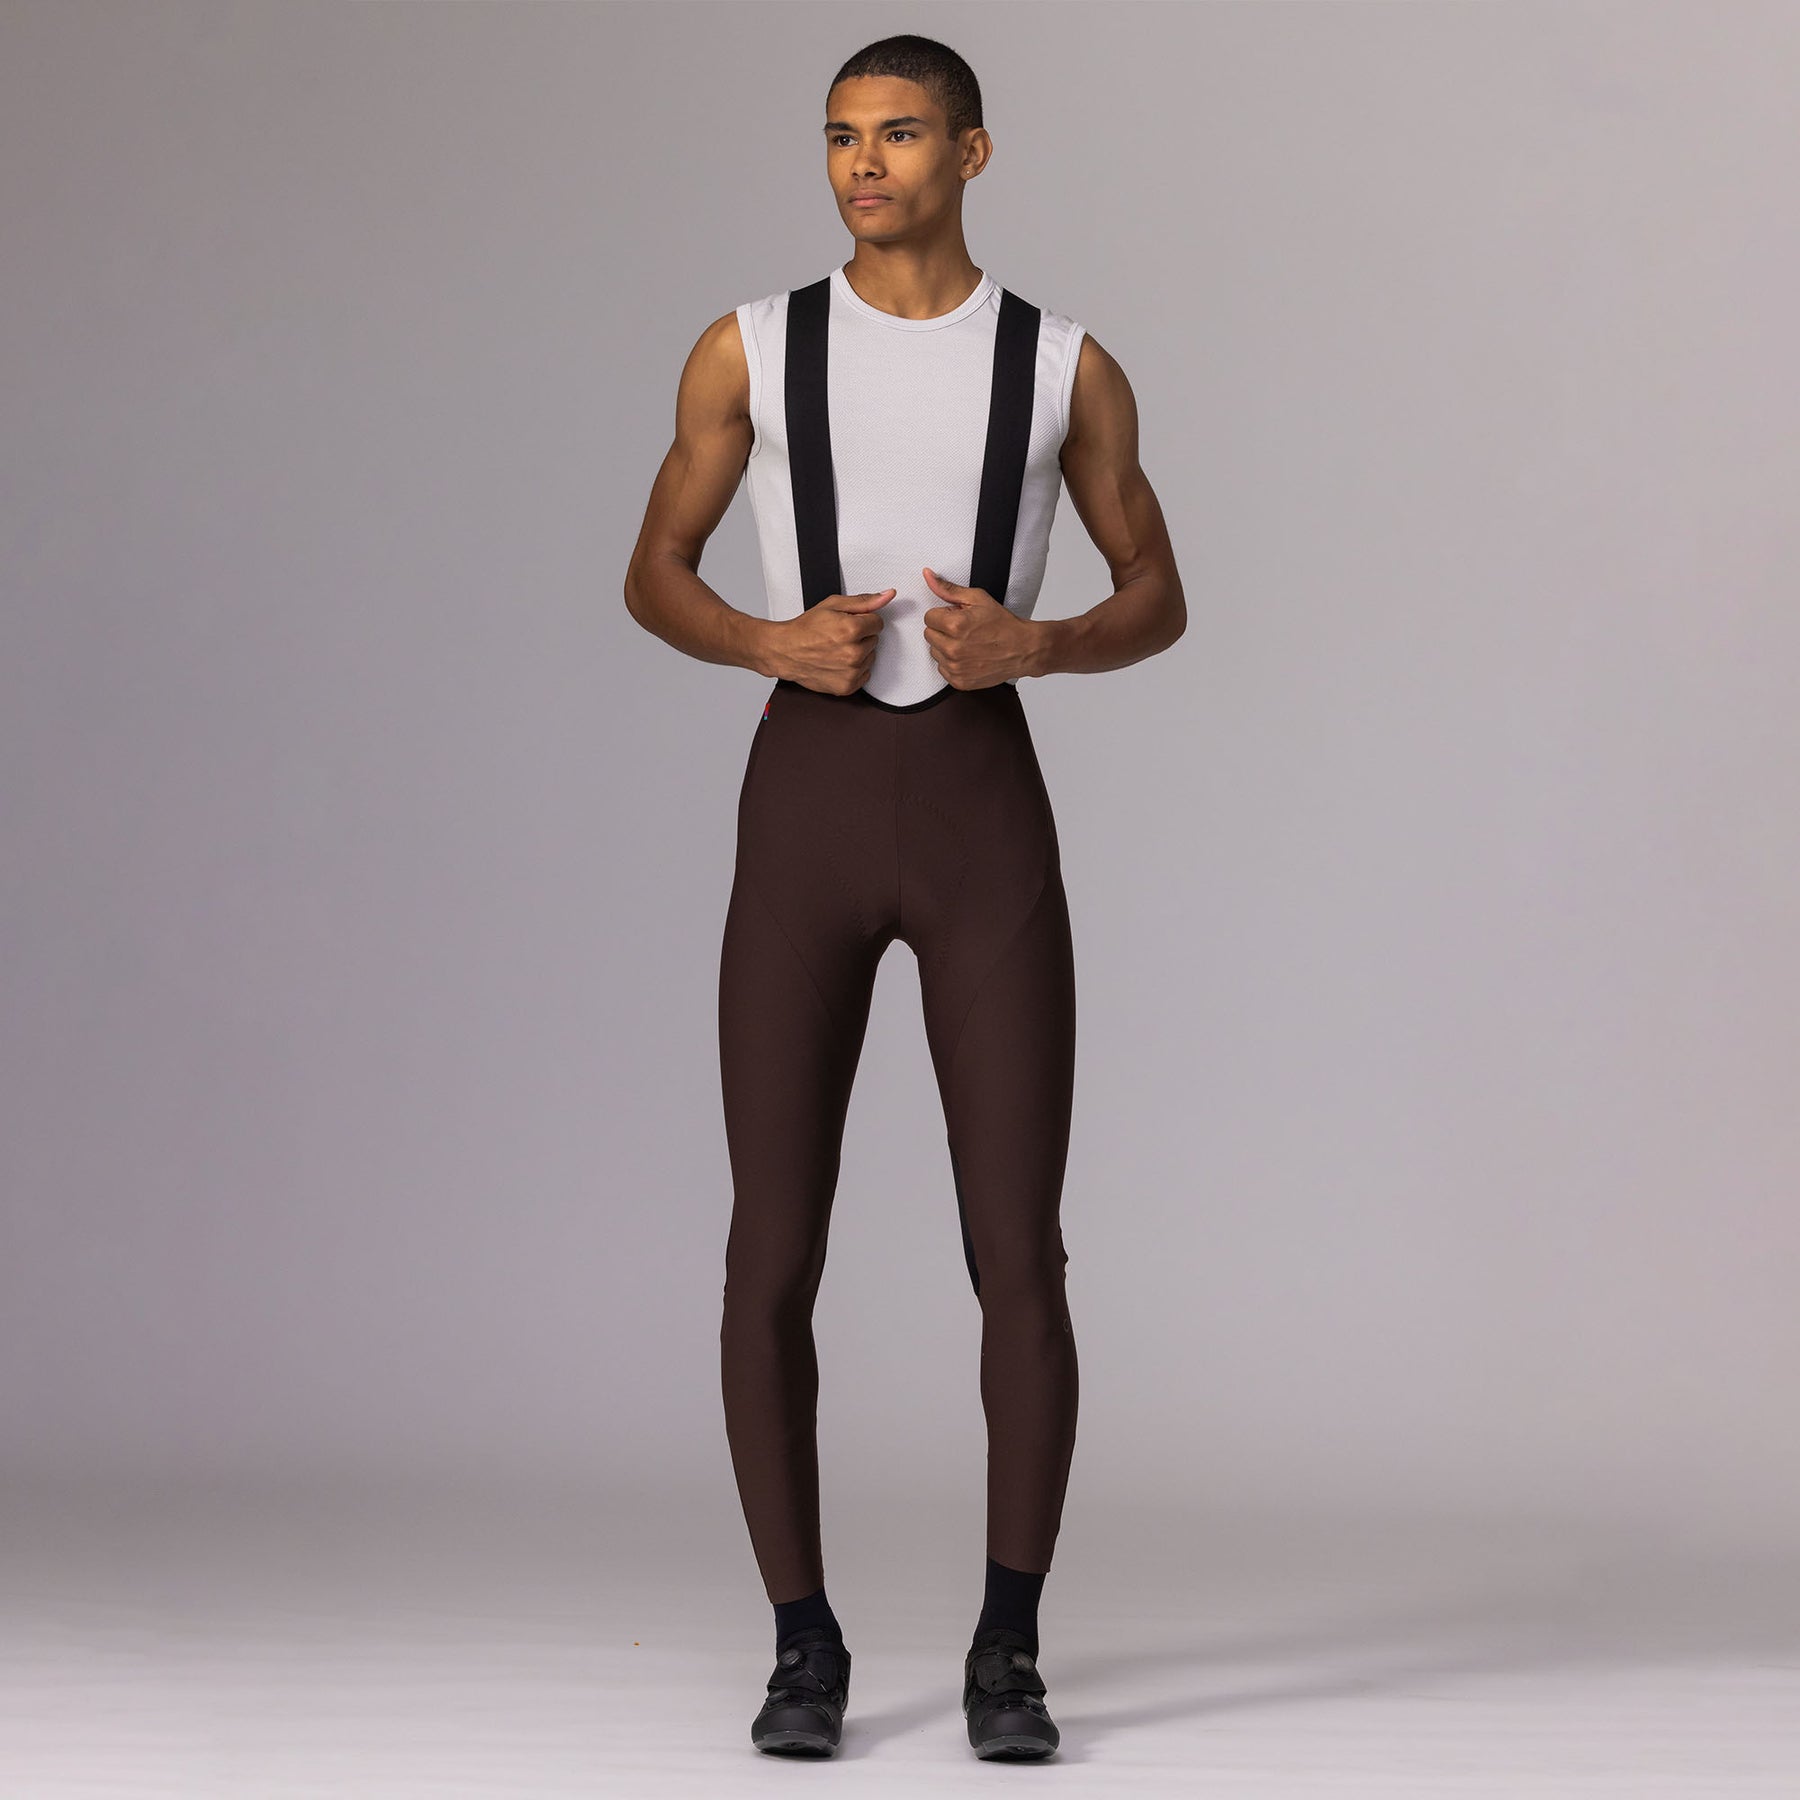 Fleece Lined Criss-Cross Riding Tights, designed with comfort in